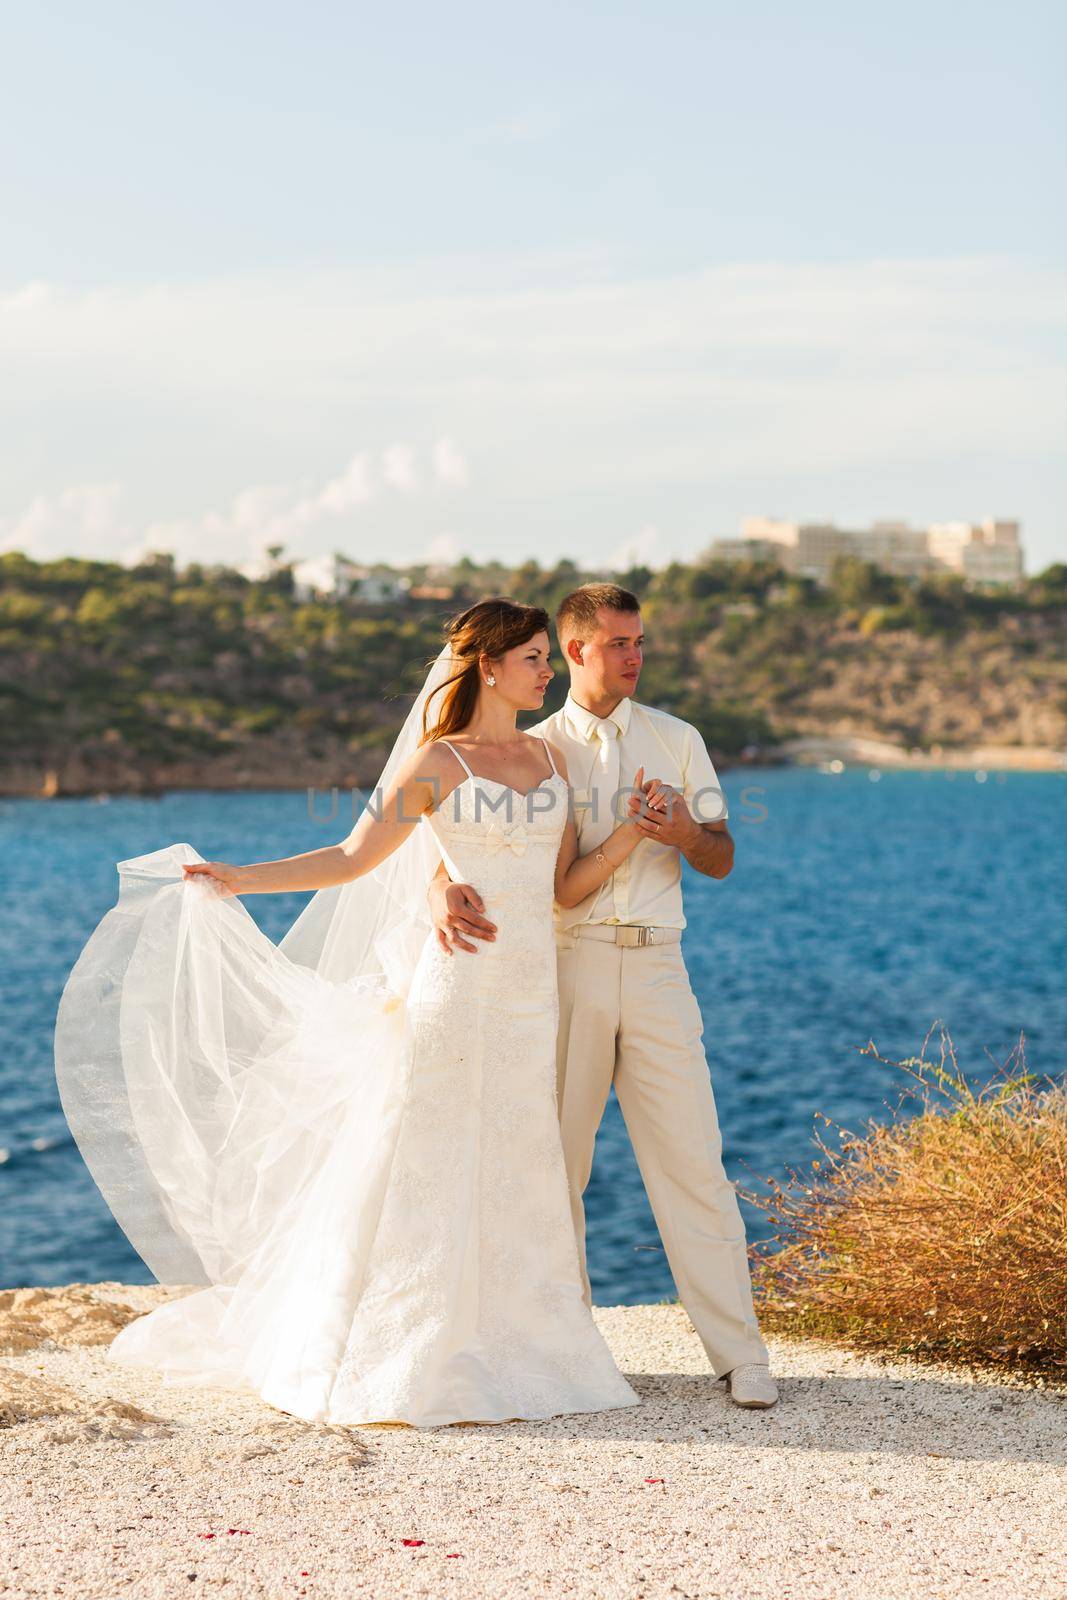 Bride and groom on a romantic moment on nature. Stylish wedding couple outdoors by Satura86